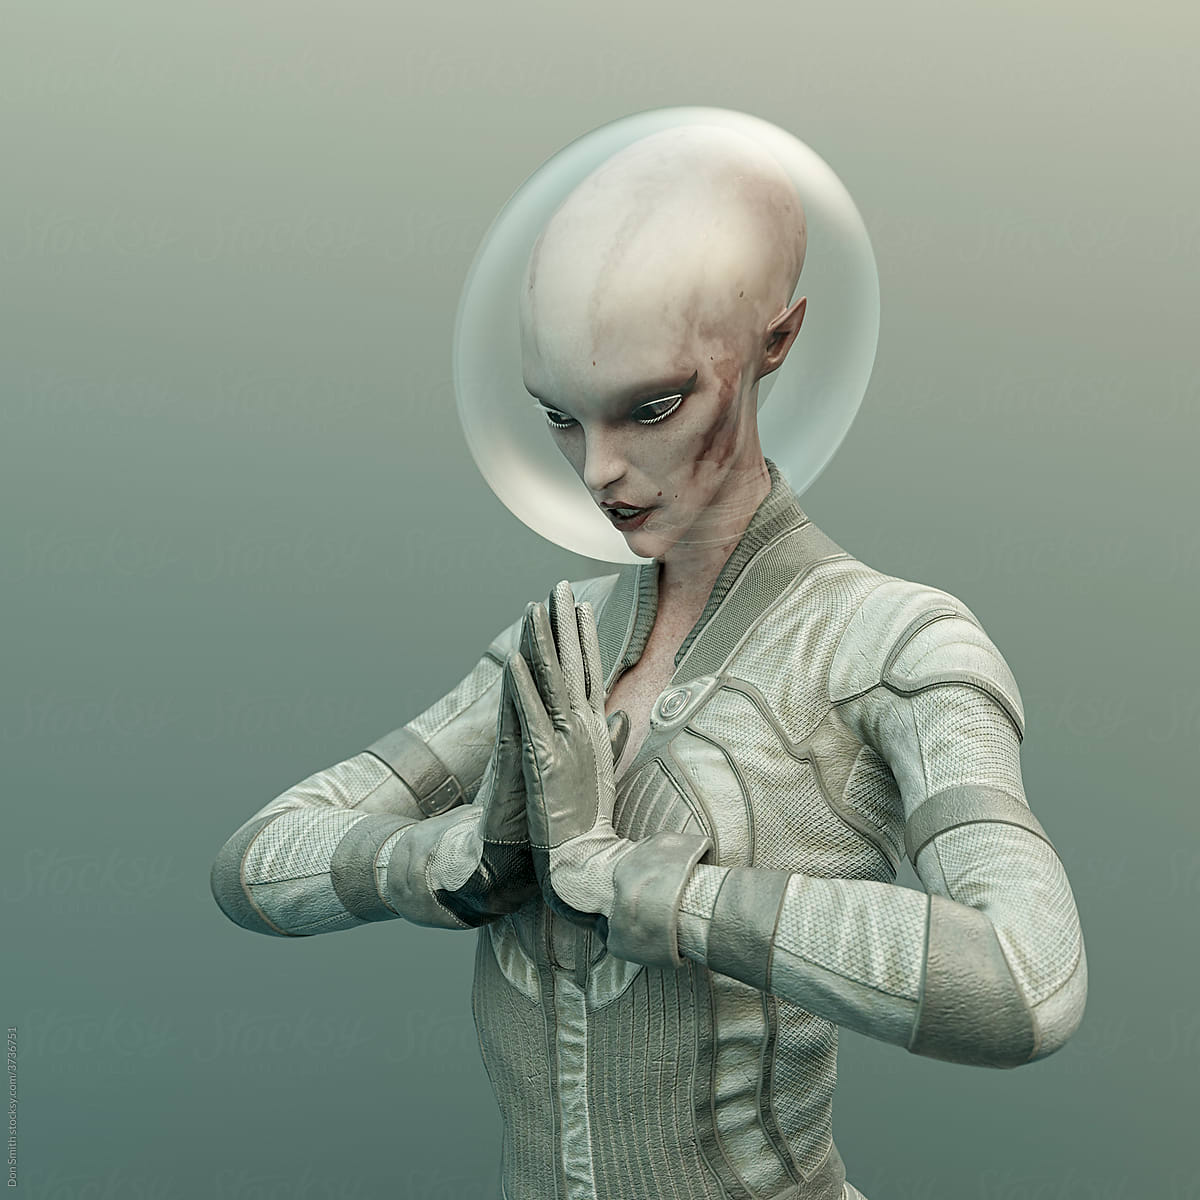 Alien woman with spacesuit and glass helmet